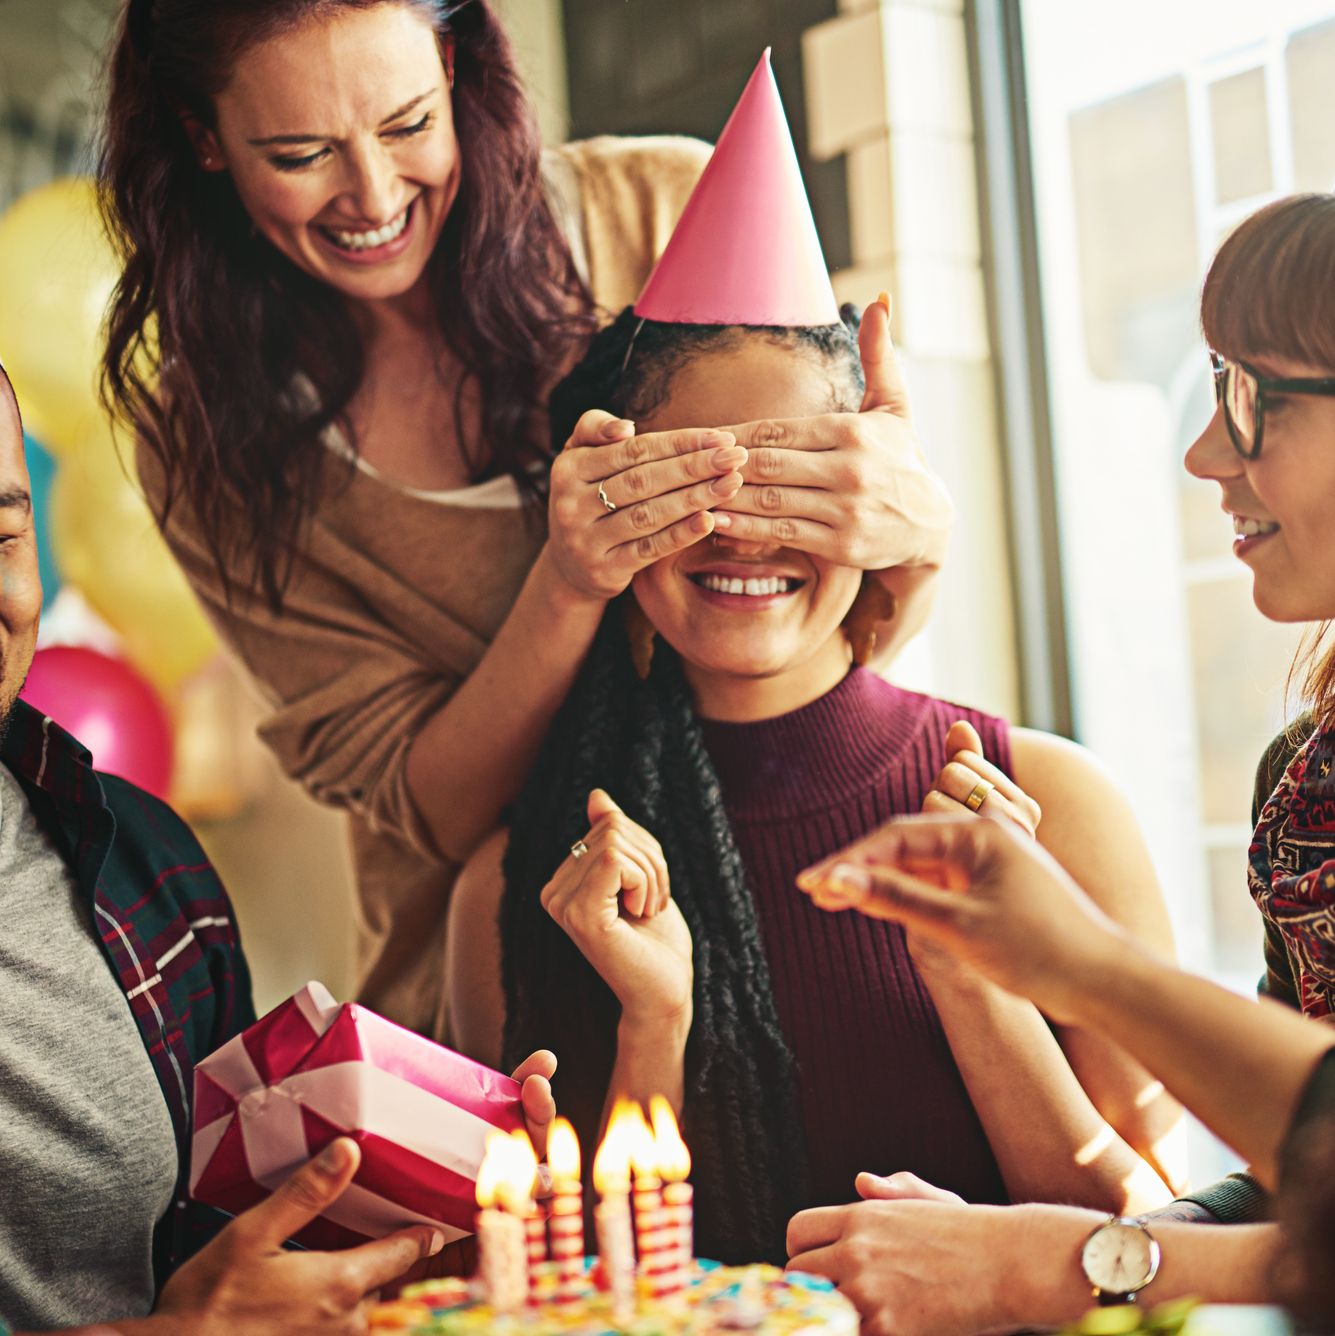 How to Plan a Surprise Birthday Party That Stays a Secret Until the Very Last Second